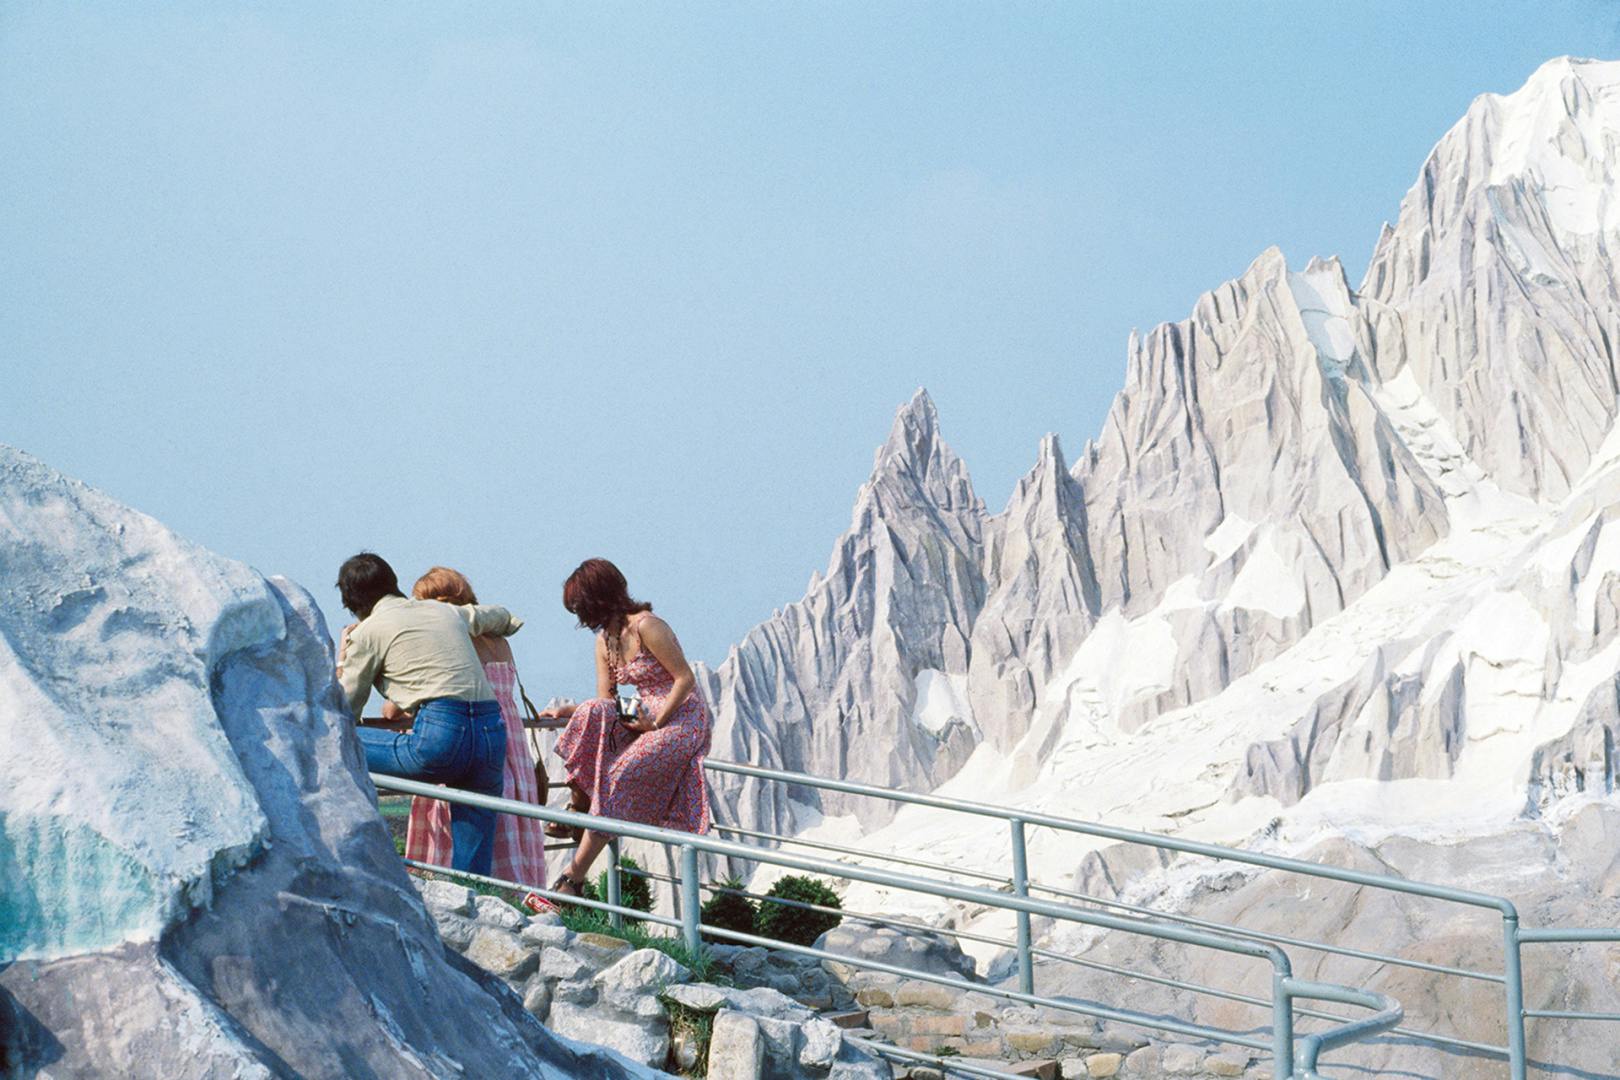 Photograph by Luigi Ghirri showing people walking up stairs in front of a replica model of the Alps